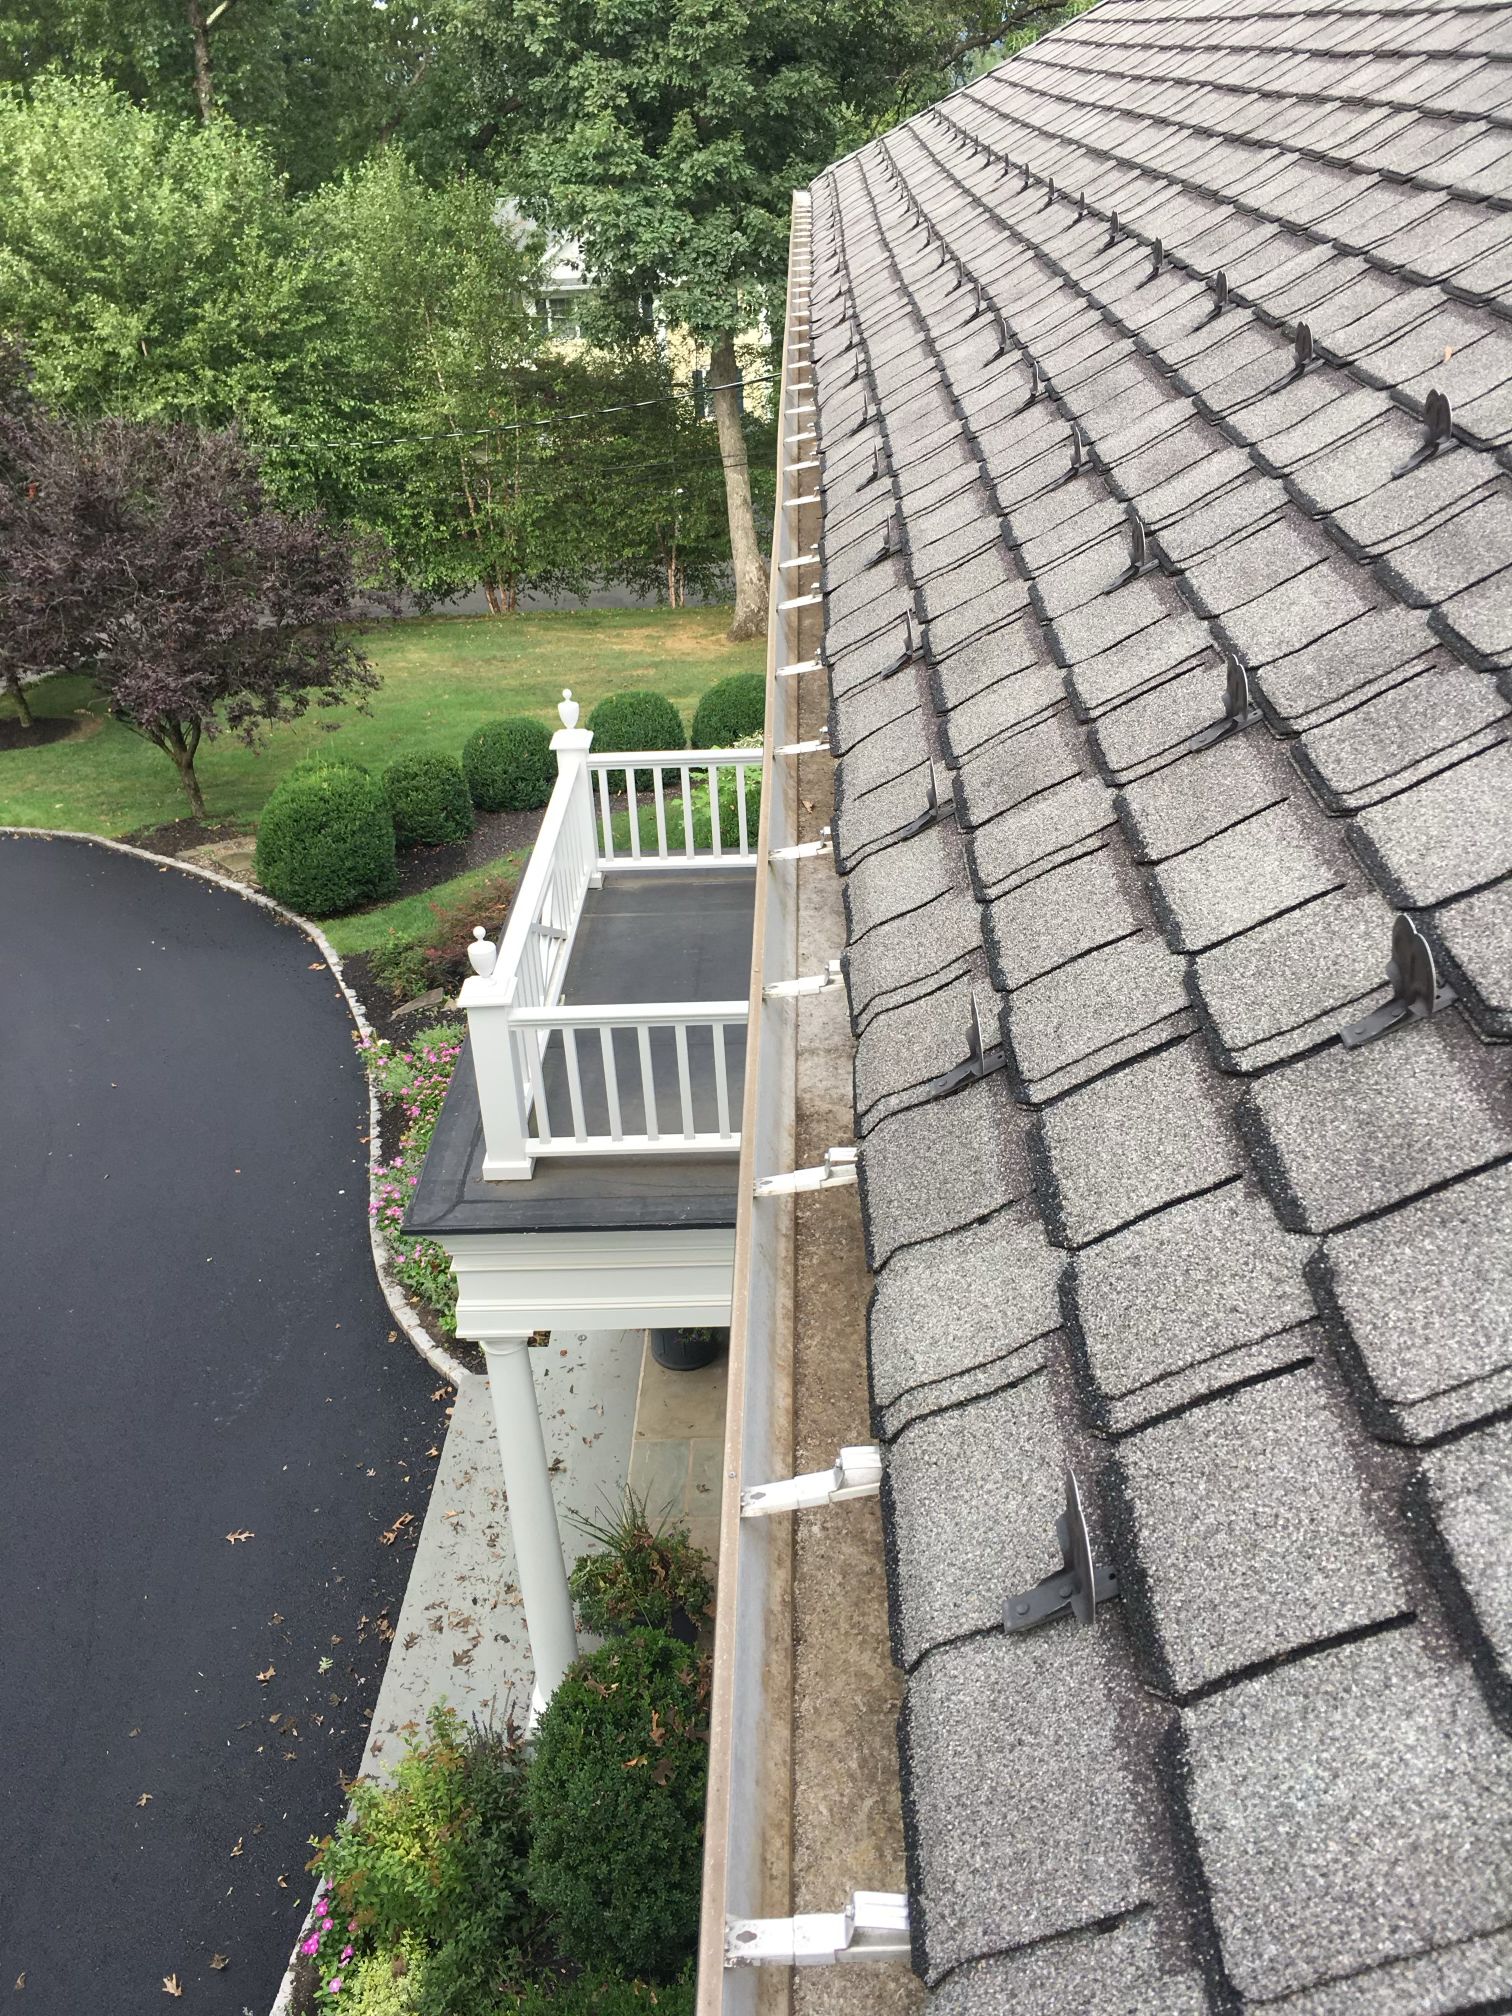 Fully insured Gutter cleaning & repairing services